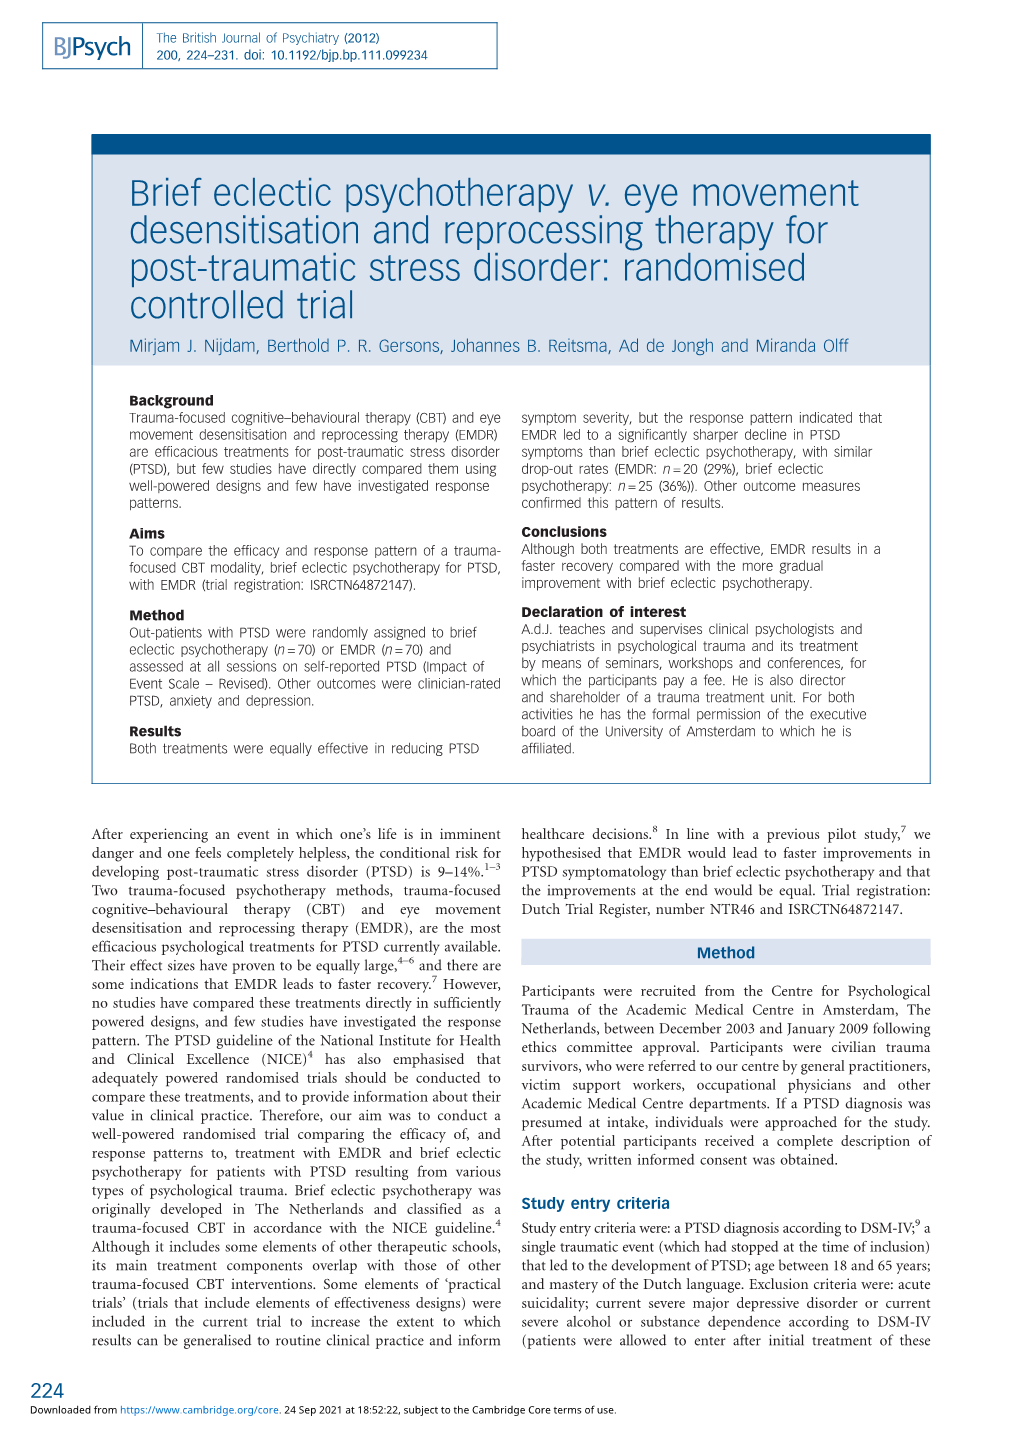 Brief Eclectic Psychotherapy V. Eye Movement Desensitisation and Reprocessing Therapy for Post-Traumatic Stress Disorder: Randomised Controlled Trial Mirjam J